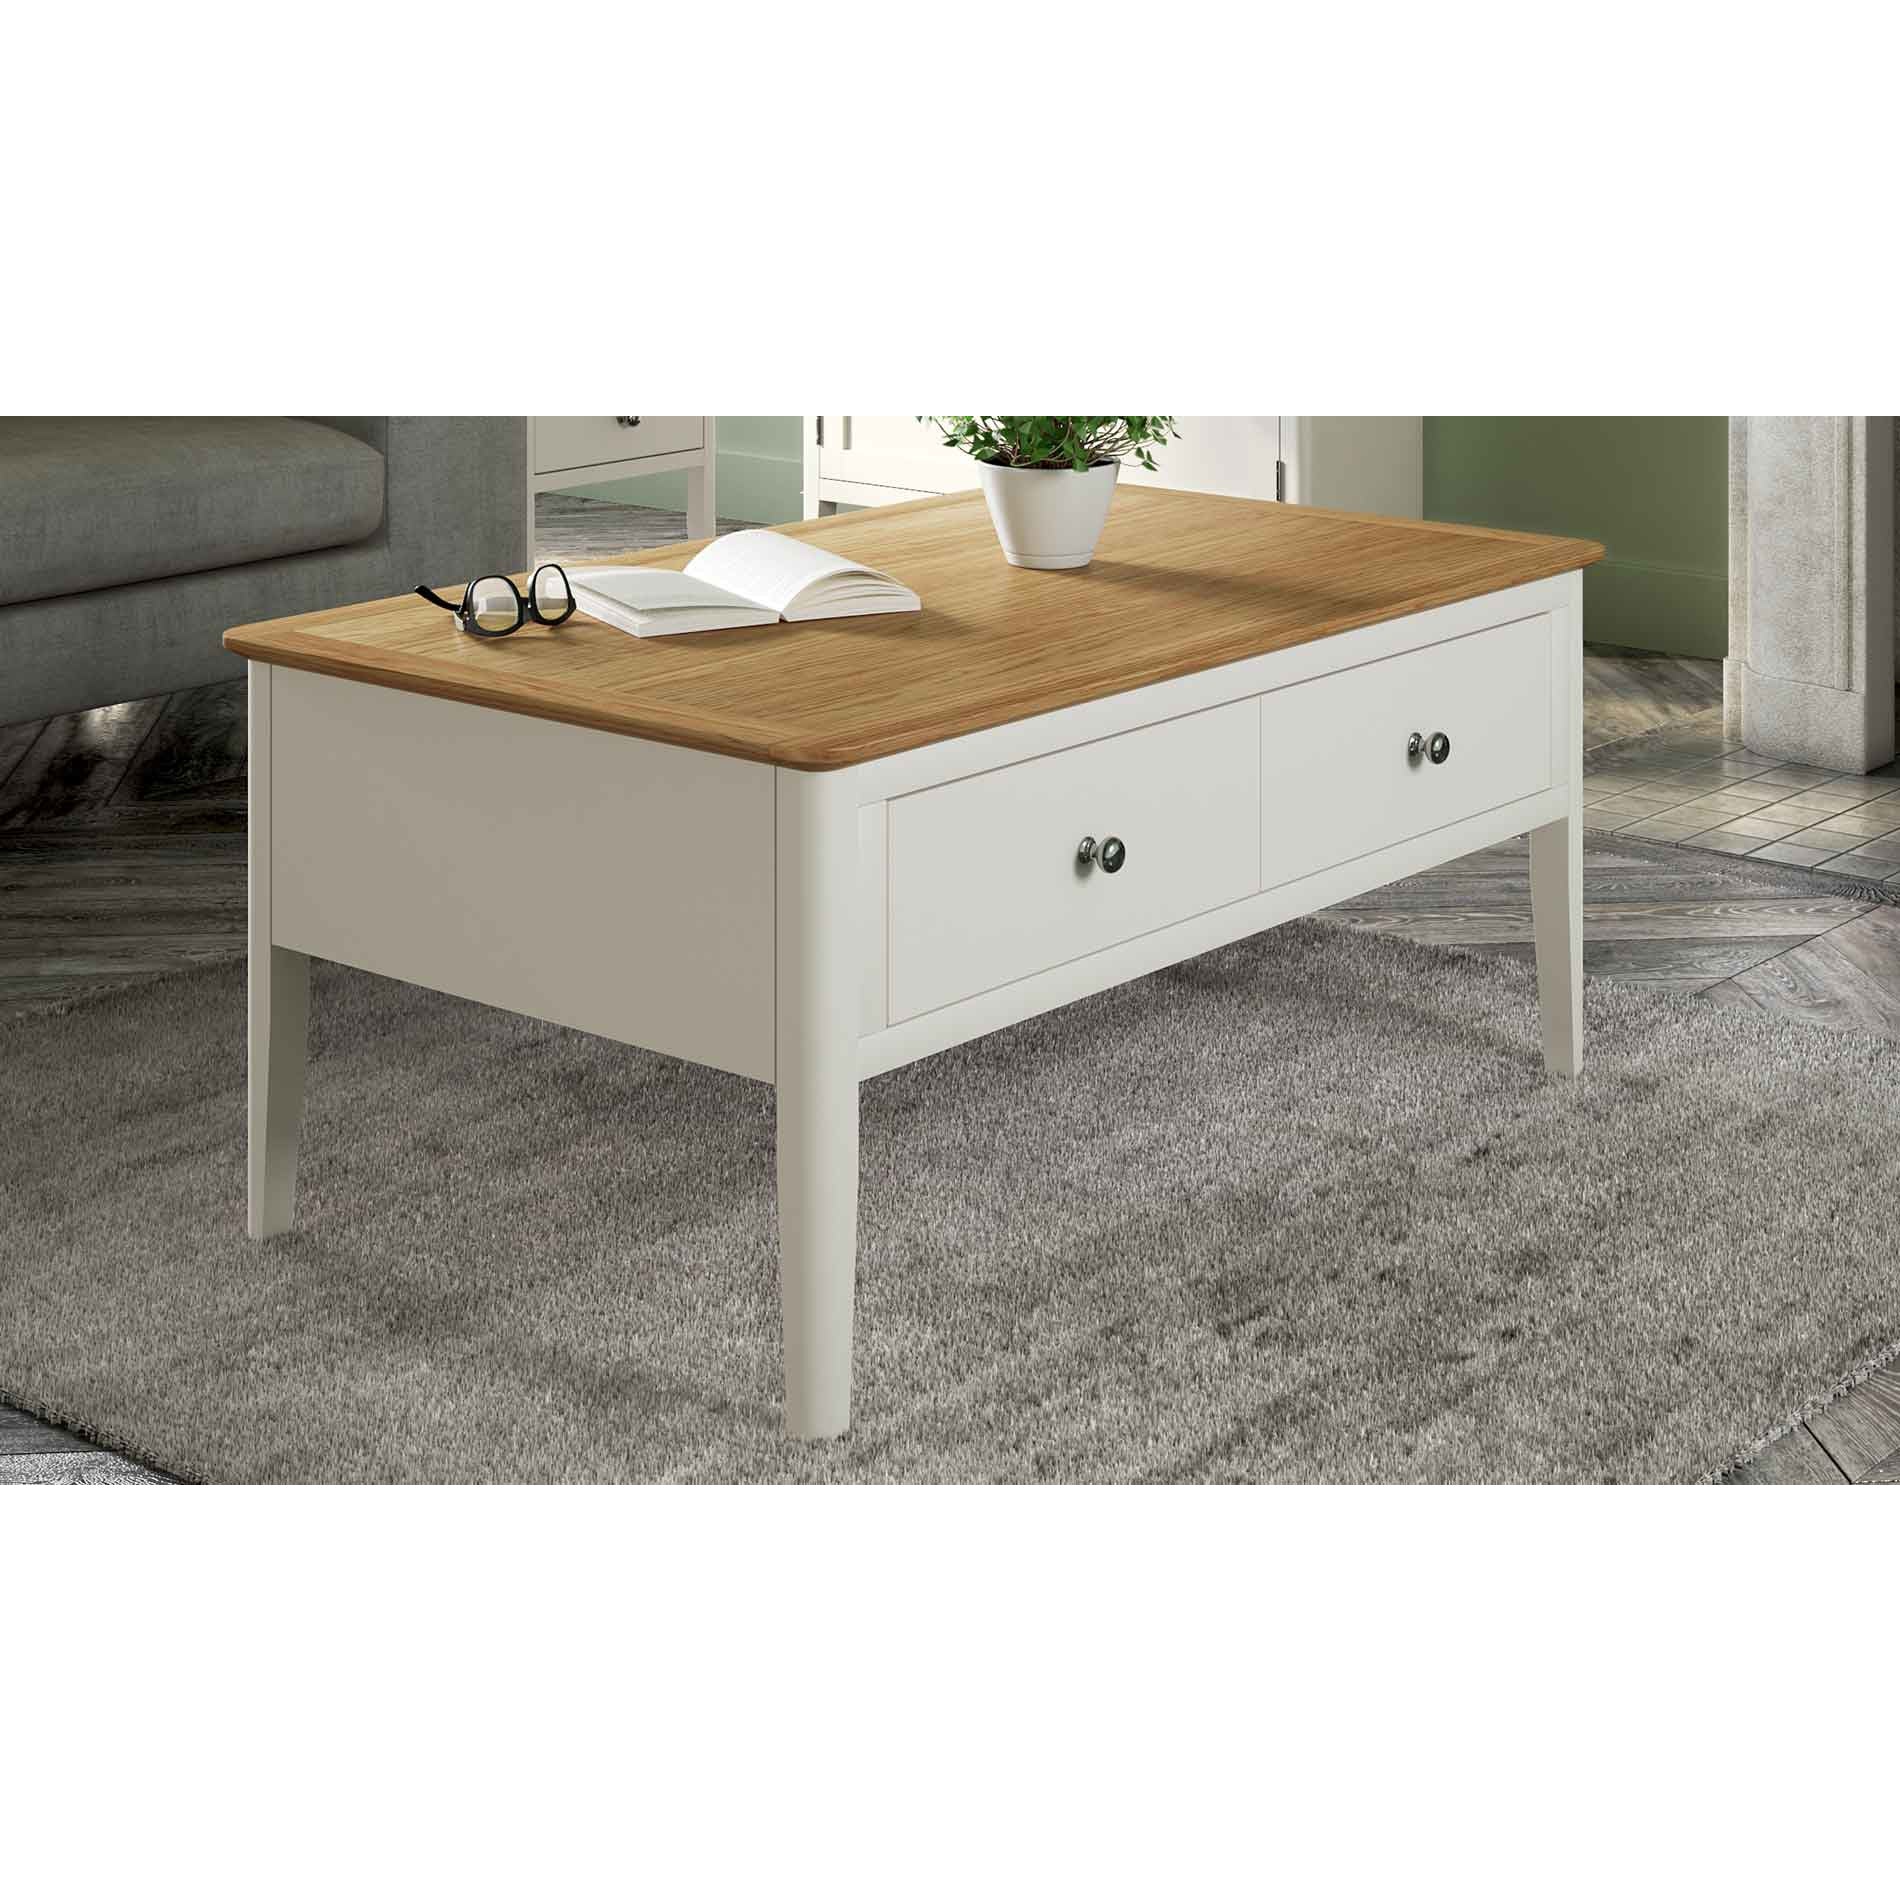 Ascot Coffee Table from Upstairs Downstairs Furniture in Lisburn, Monaghan and Enniskillen | coffee table